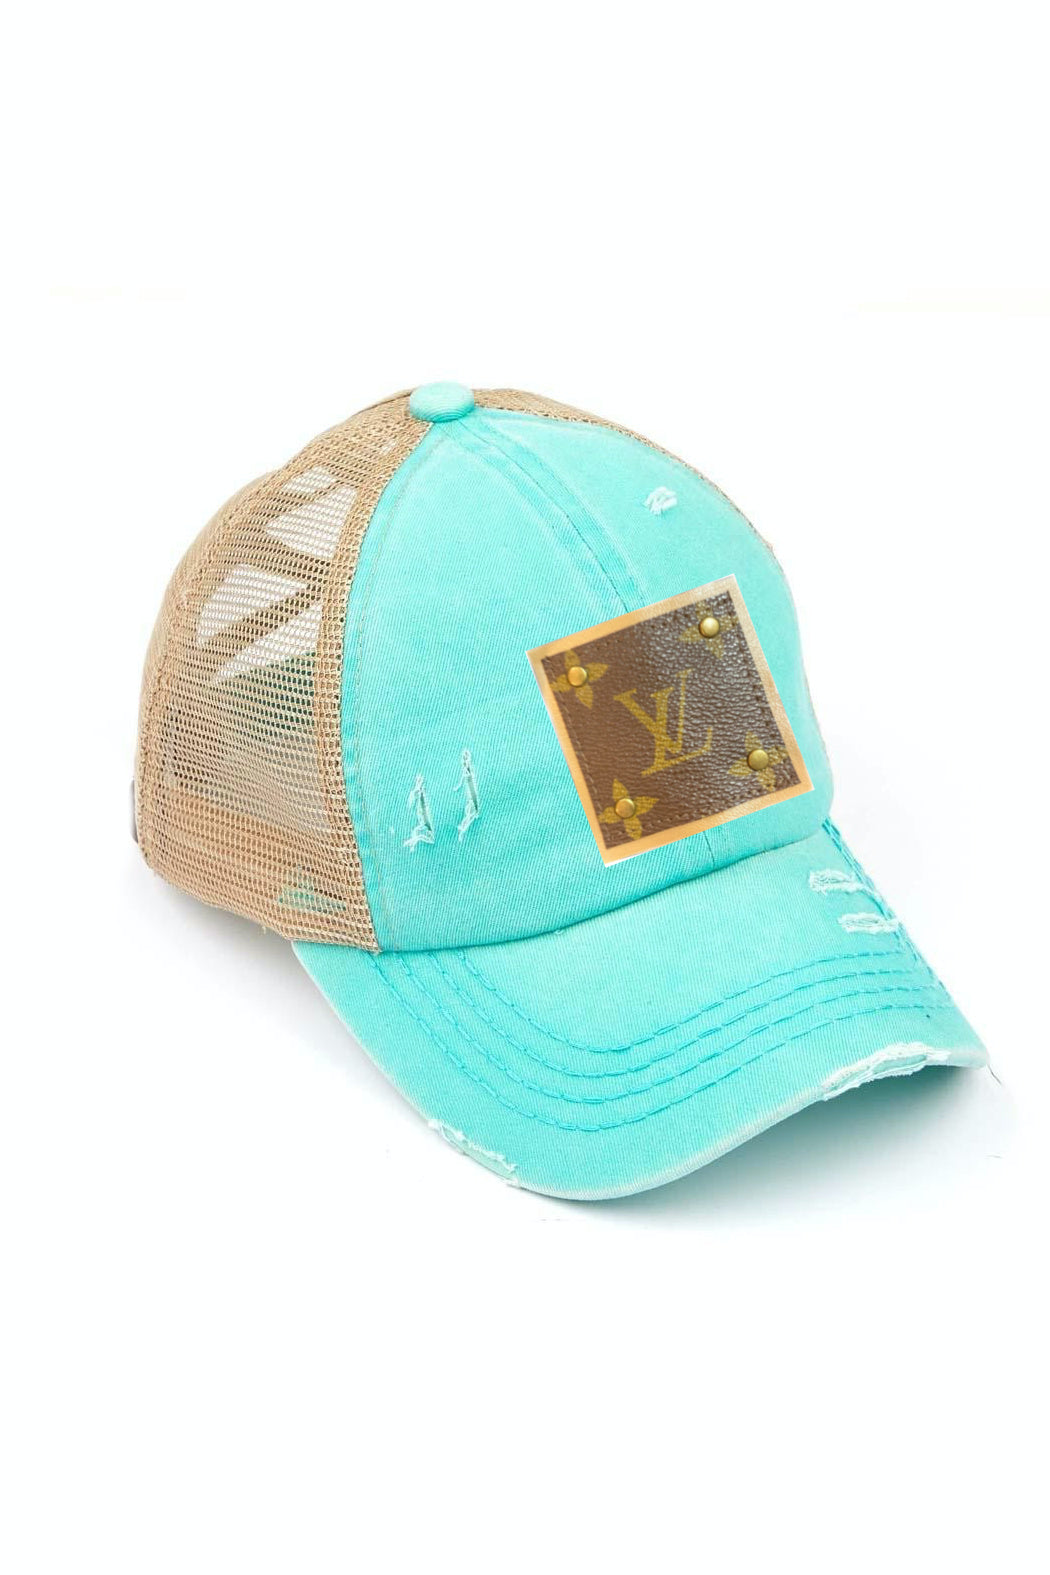 Upcycled Distressed Trucker Cap -  available in 13 colors